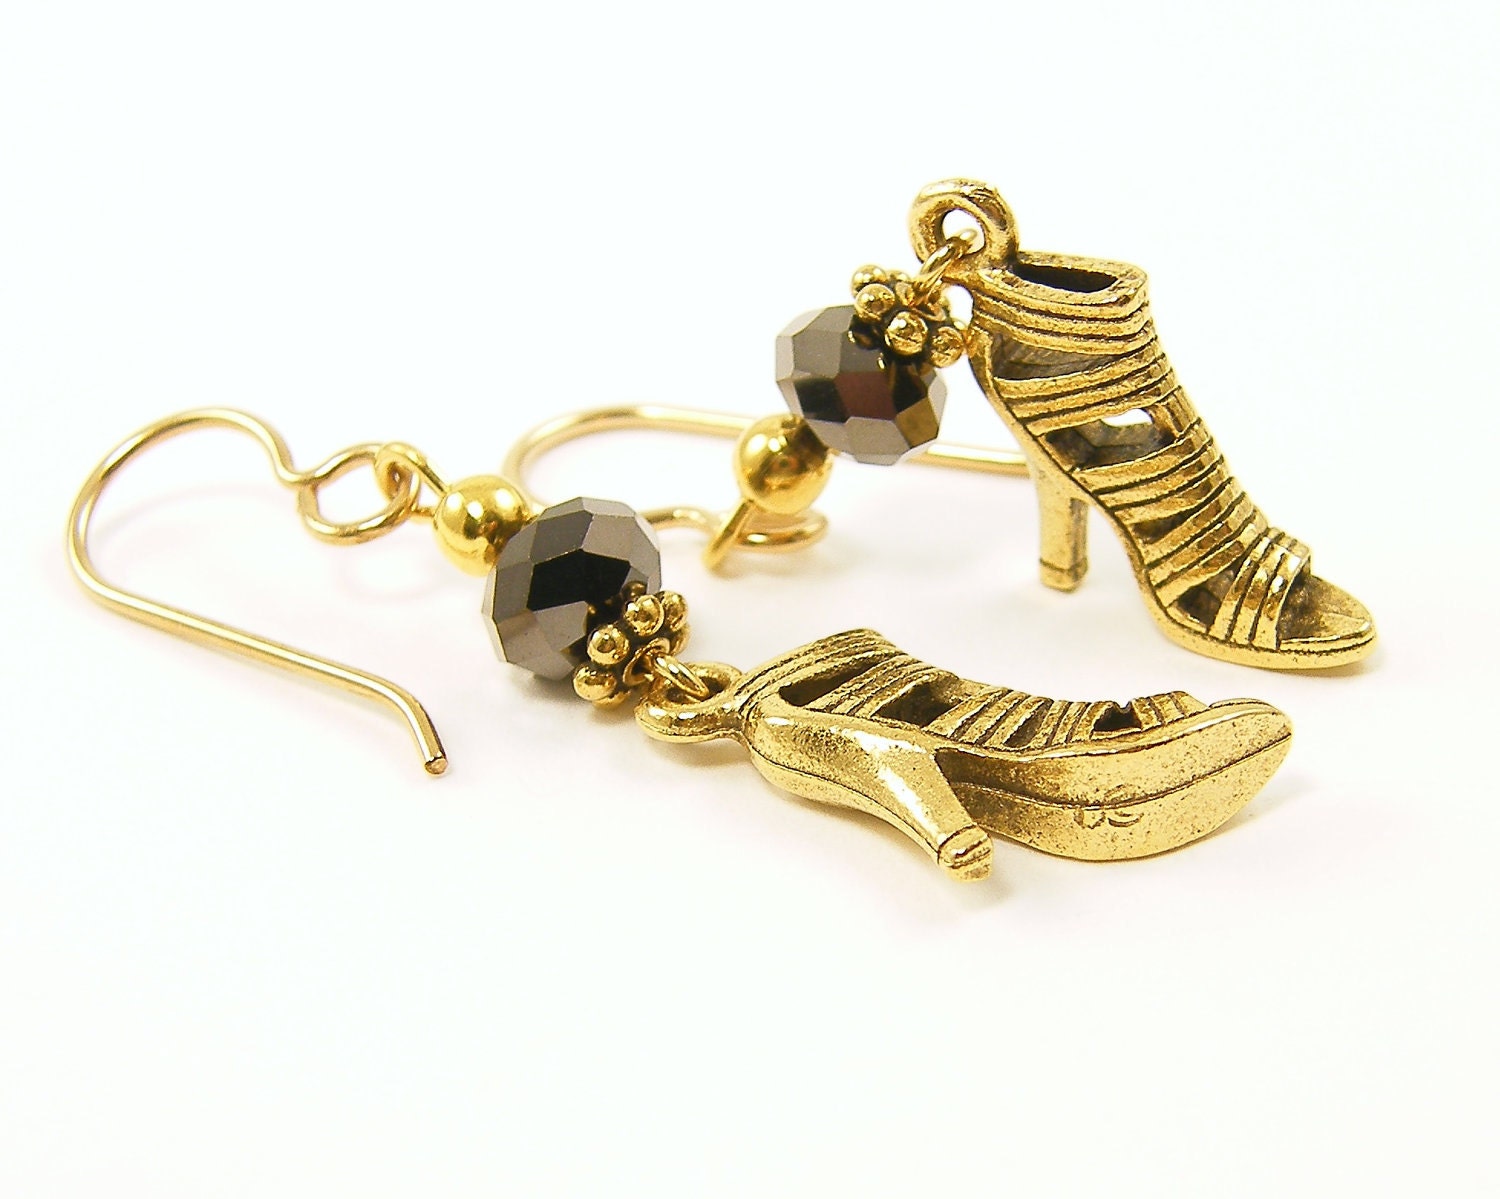 Fashion Earrings - Gold Shoe Black Luster Bead High Heel Sexy Stiletto Dangle Accessory Jewelry - CharleneSevier